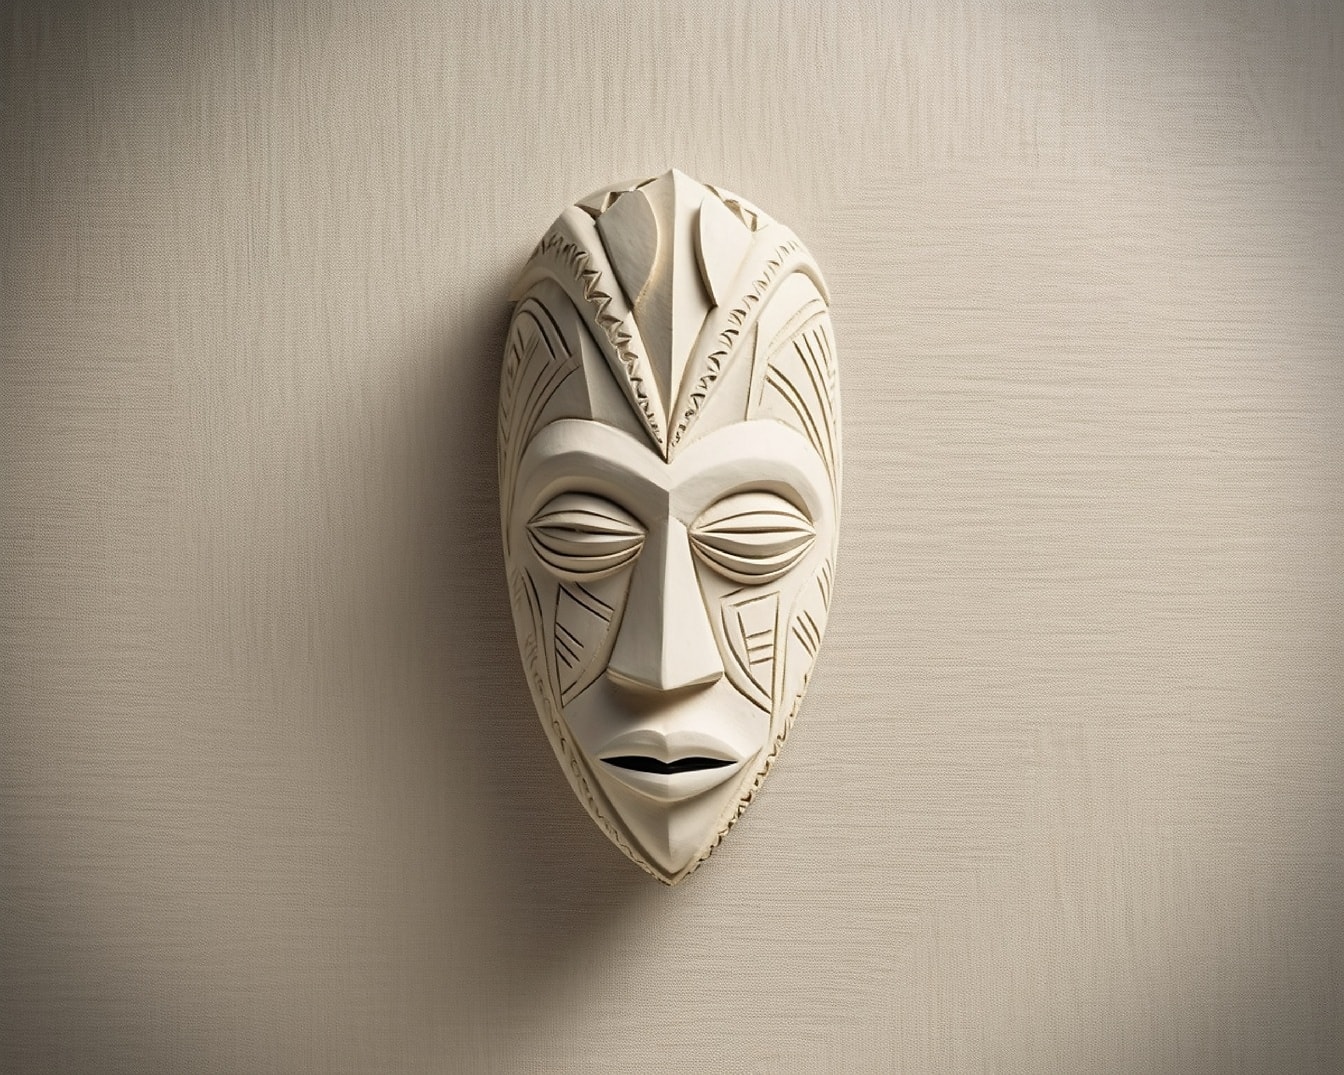 Handmade carving wooden face mask artwork on beige wall